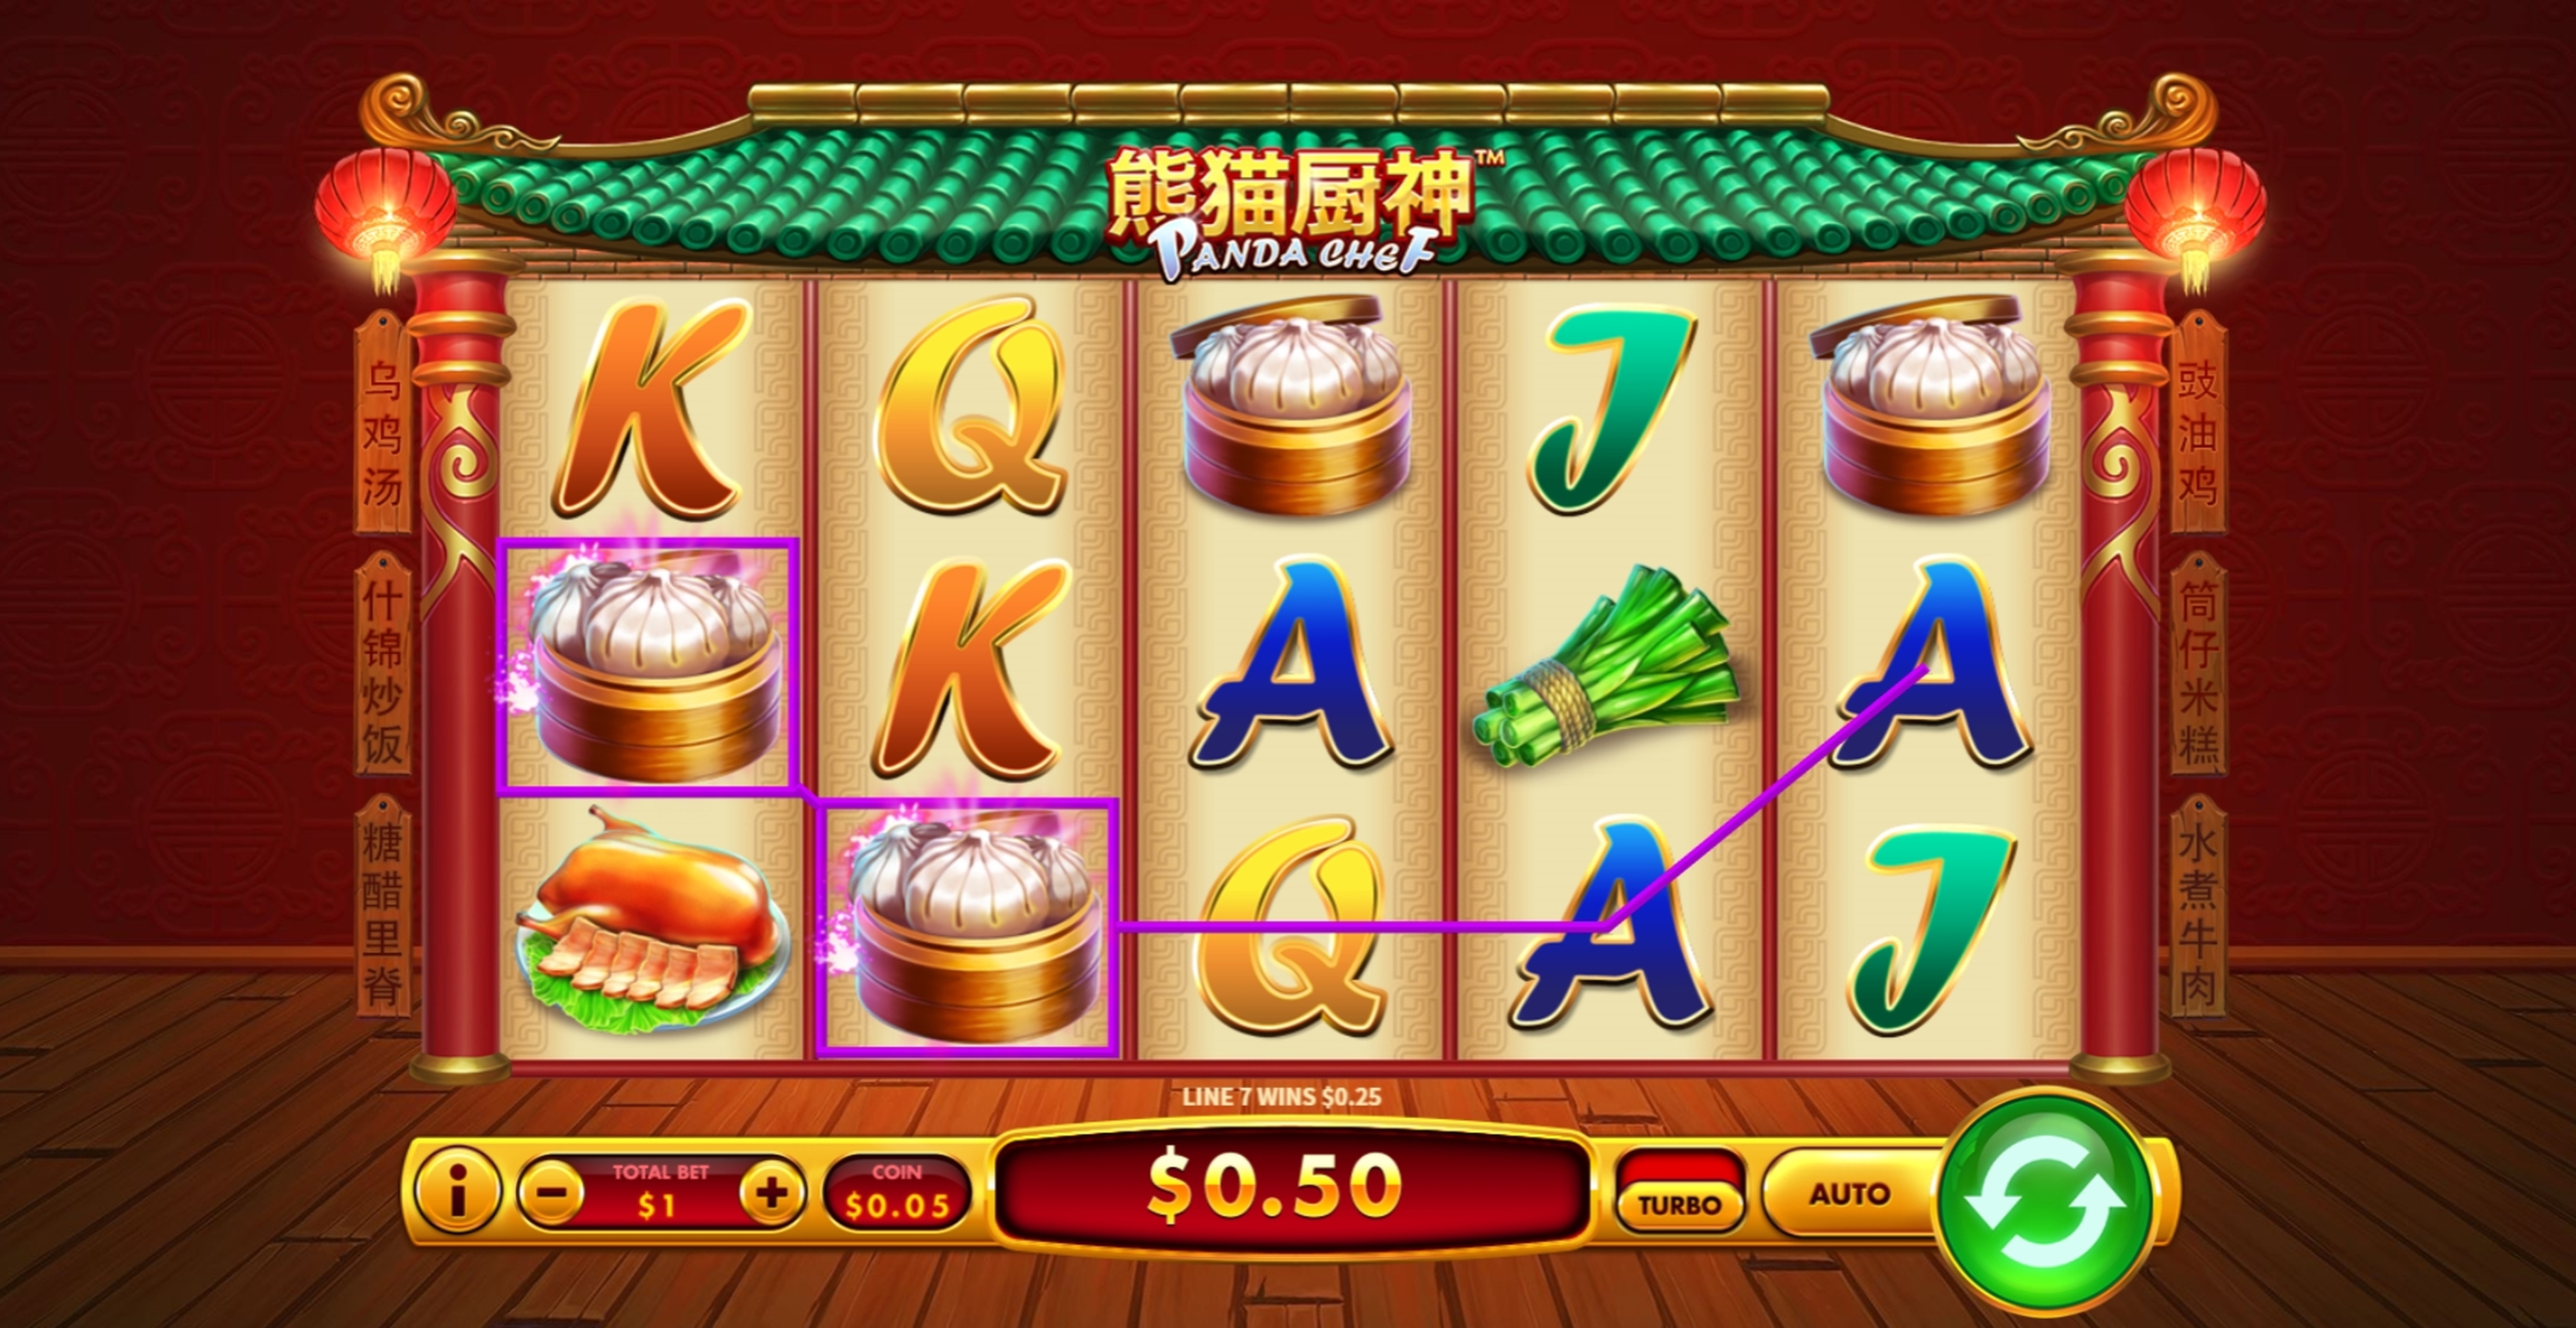 Win Money in Panda Chef Free Slot Game by Skywind